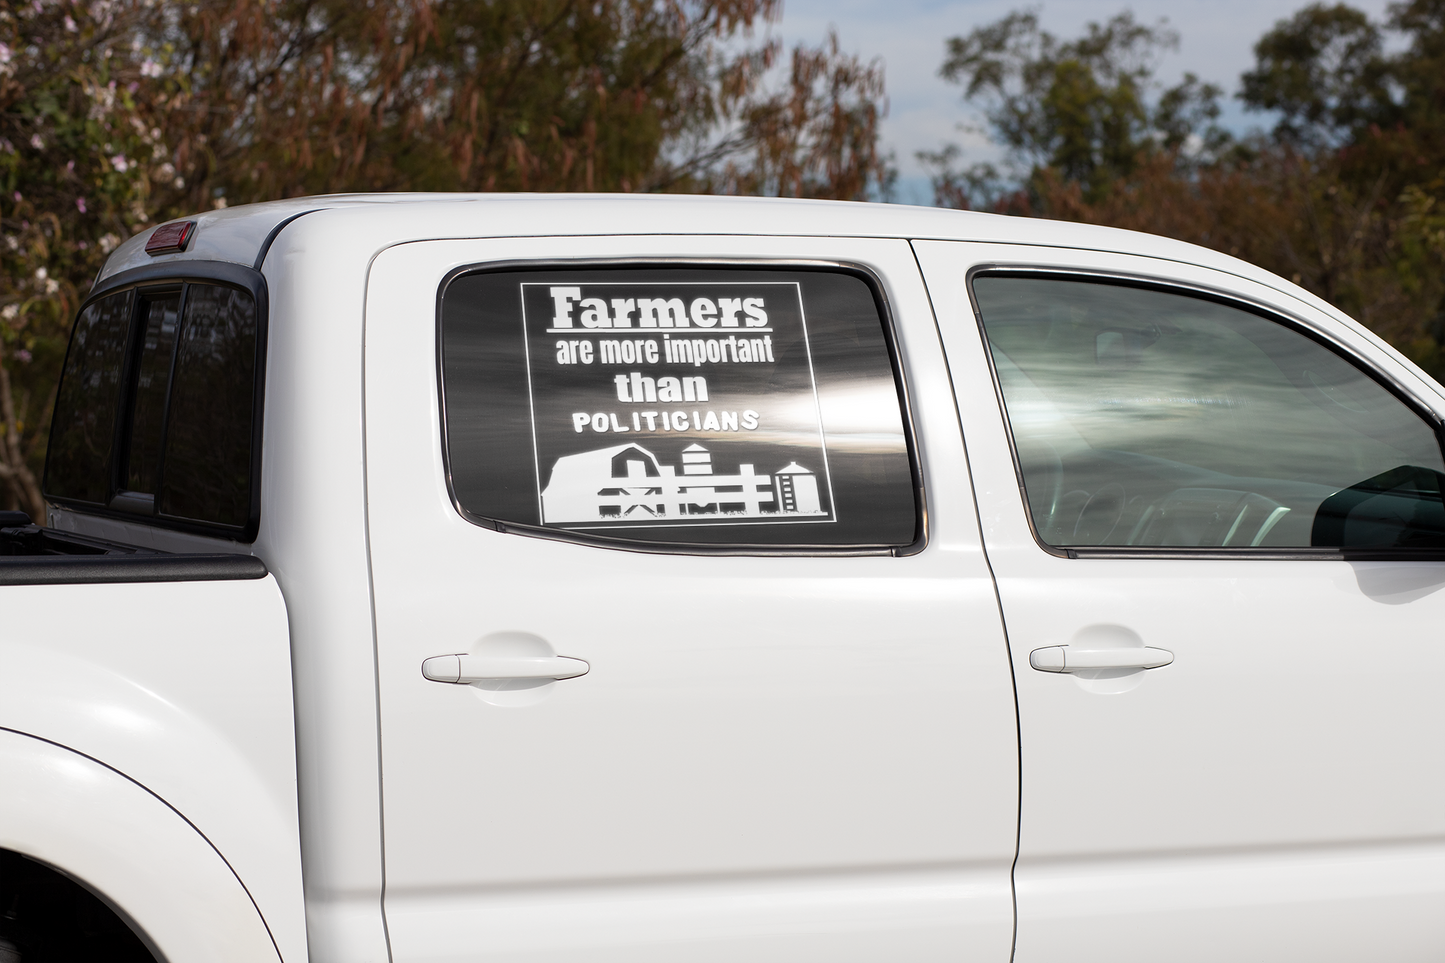 Farmers are more important than Politicians vinyl decal sticker boss gift car decor dads day gift gift for dad gift for grandpa gift for her gift for him gift for husband gift for mom gift for sister gift for wife moms gift Unique gift Vinyl Vinyl decals vinyl sticker Vinyl stickers window decal window sticker